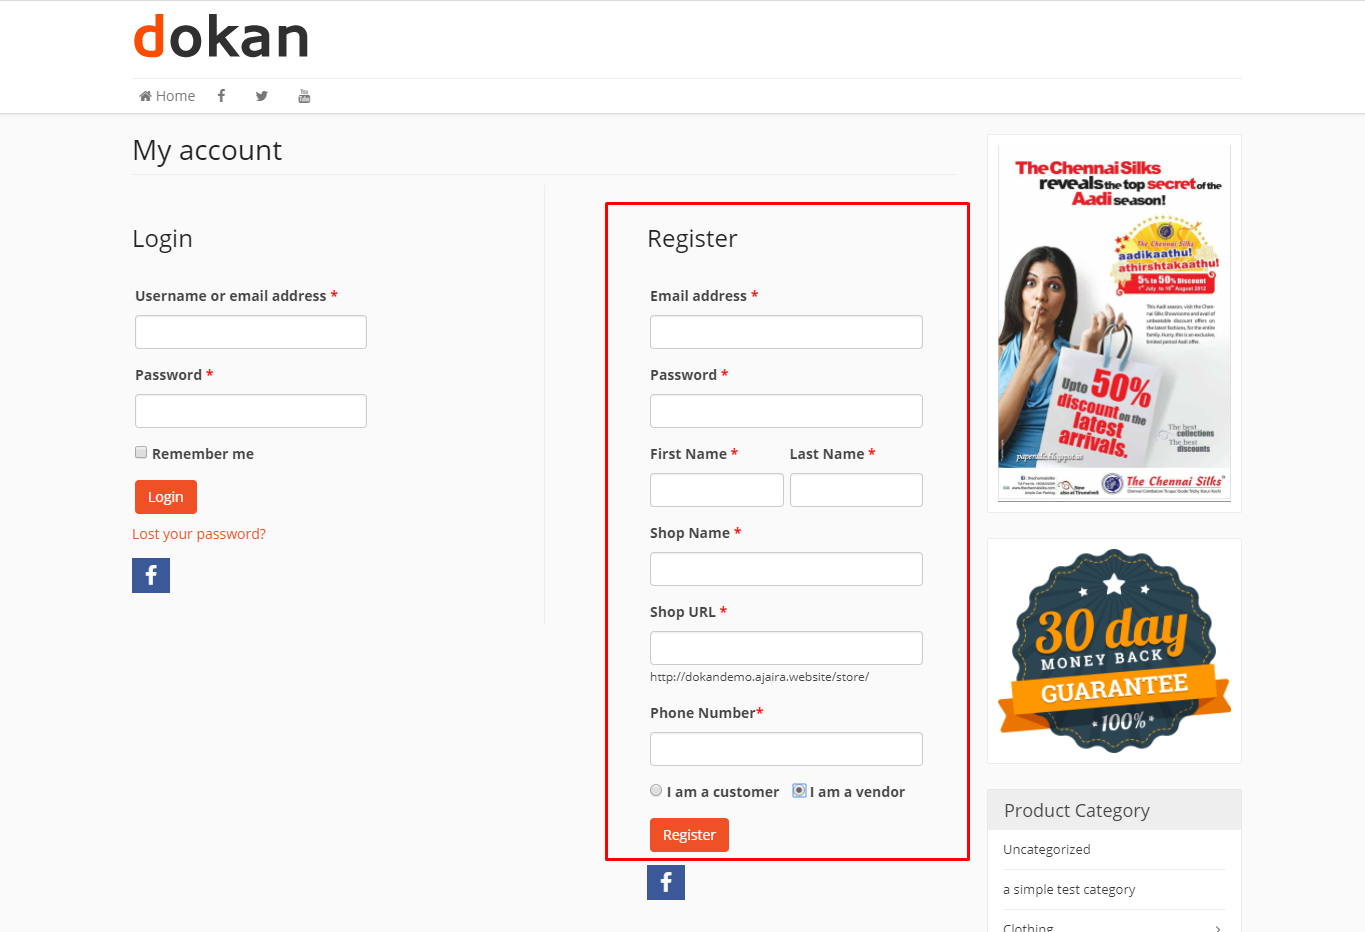 dokan registration form-how to create a used car marketplace